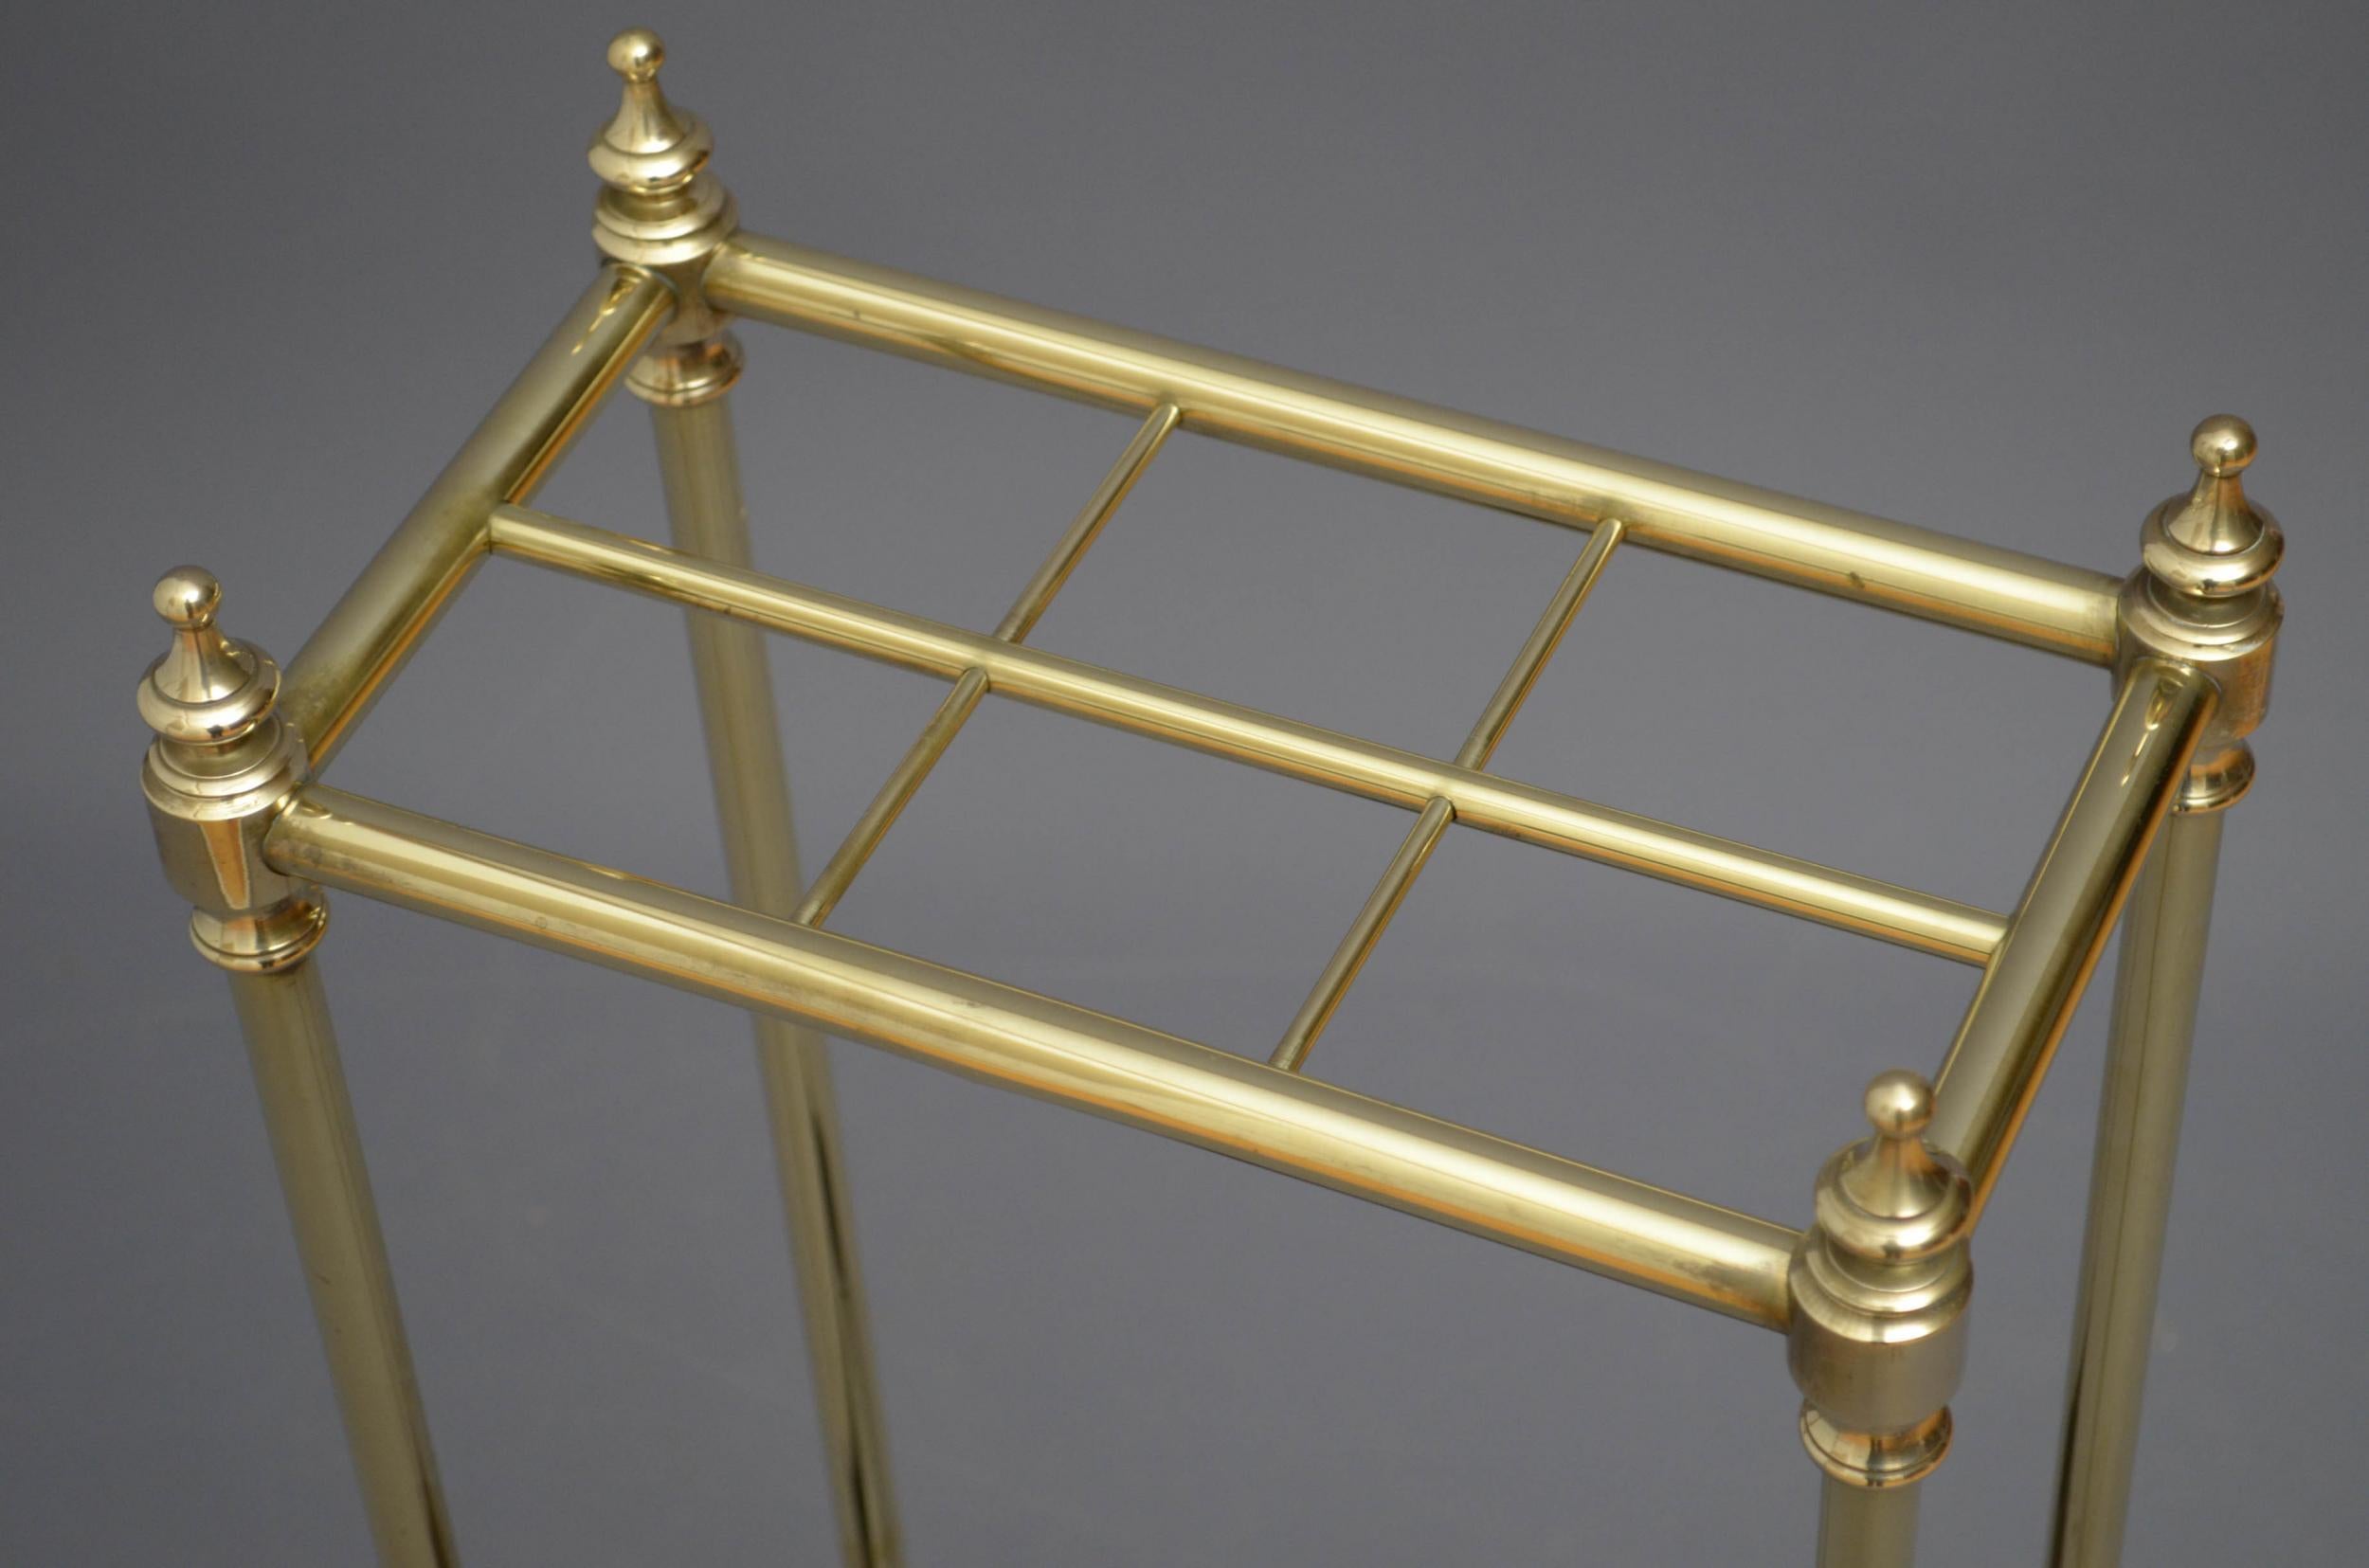 Sn5035, late Victorian / Edwardian brass stick stand, having 6 sections for umbrellas and walking sticks with finials and cast iron base, all in fantastic condition throughout, ready to place at home, c1900

Measures: H 25.5